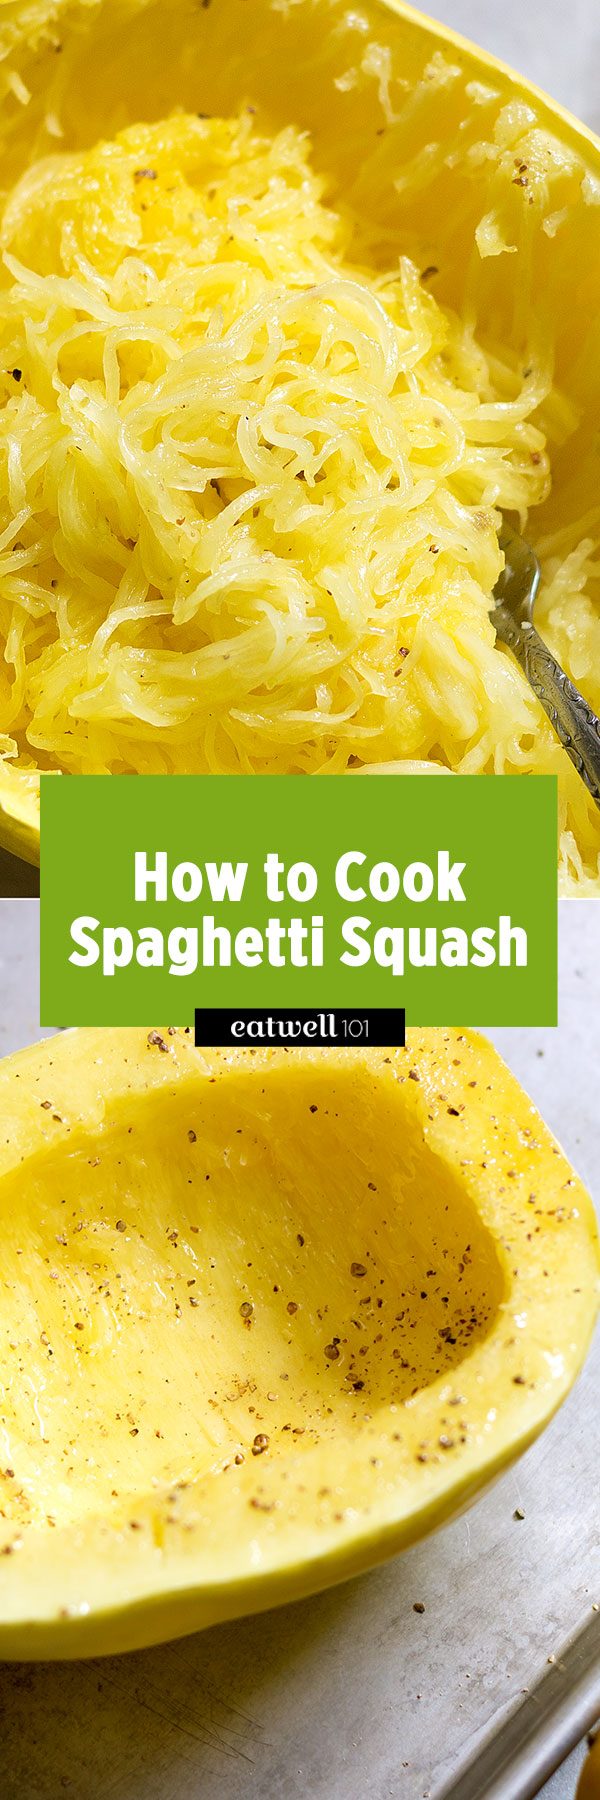 how to cook spaghetti squash in oven — Eatwell101